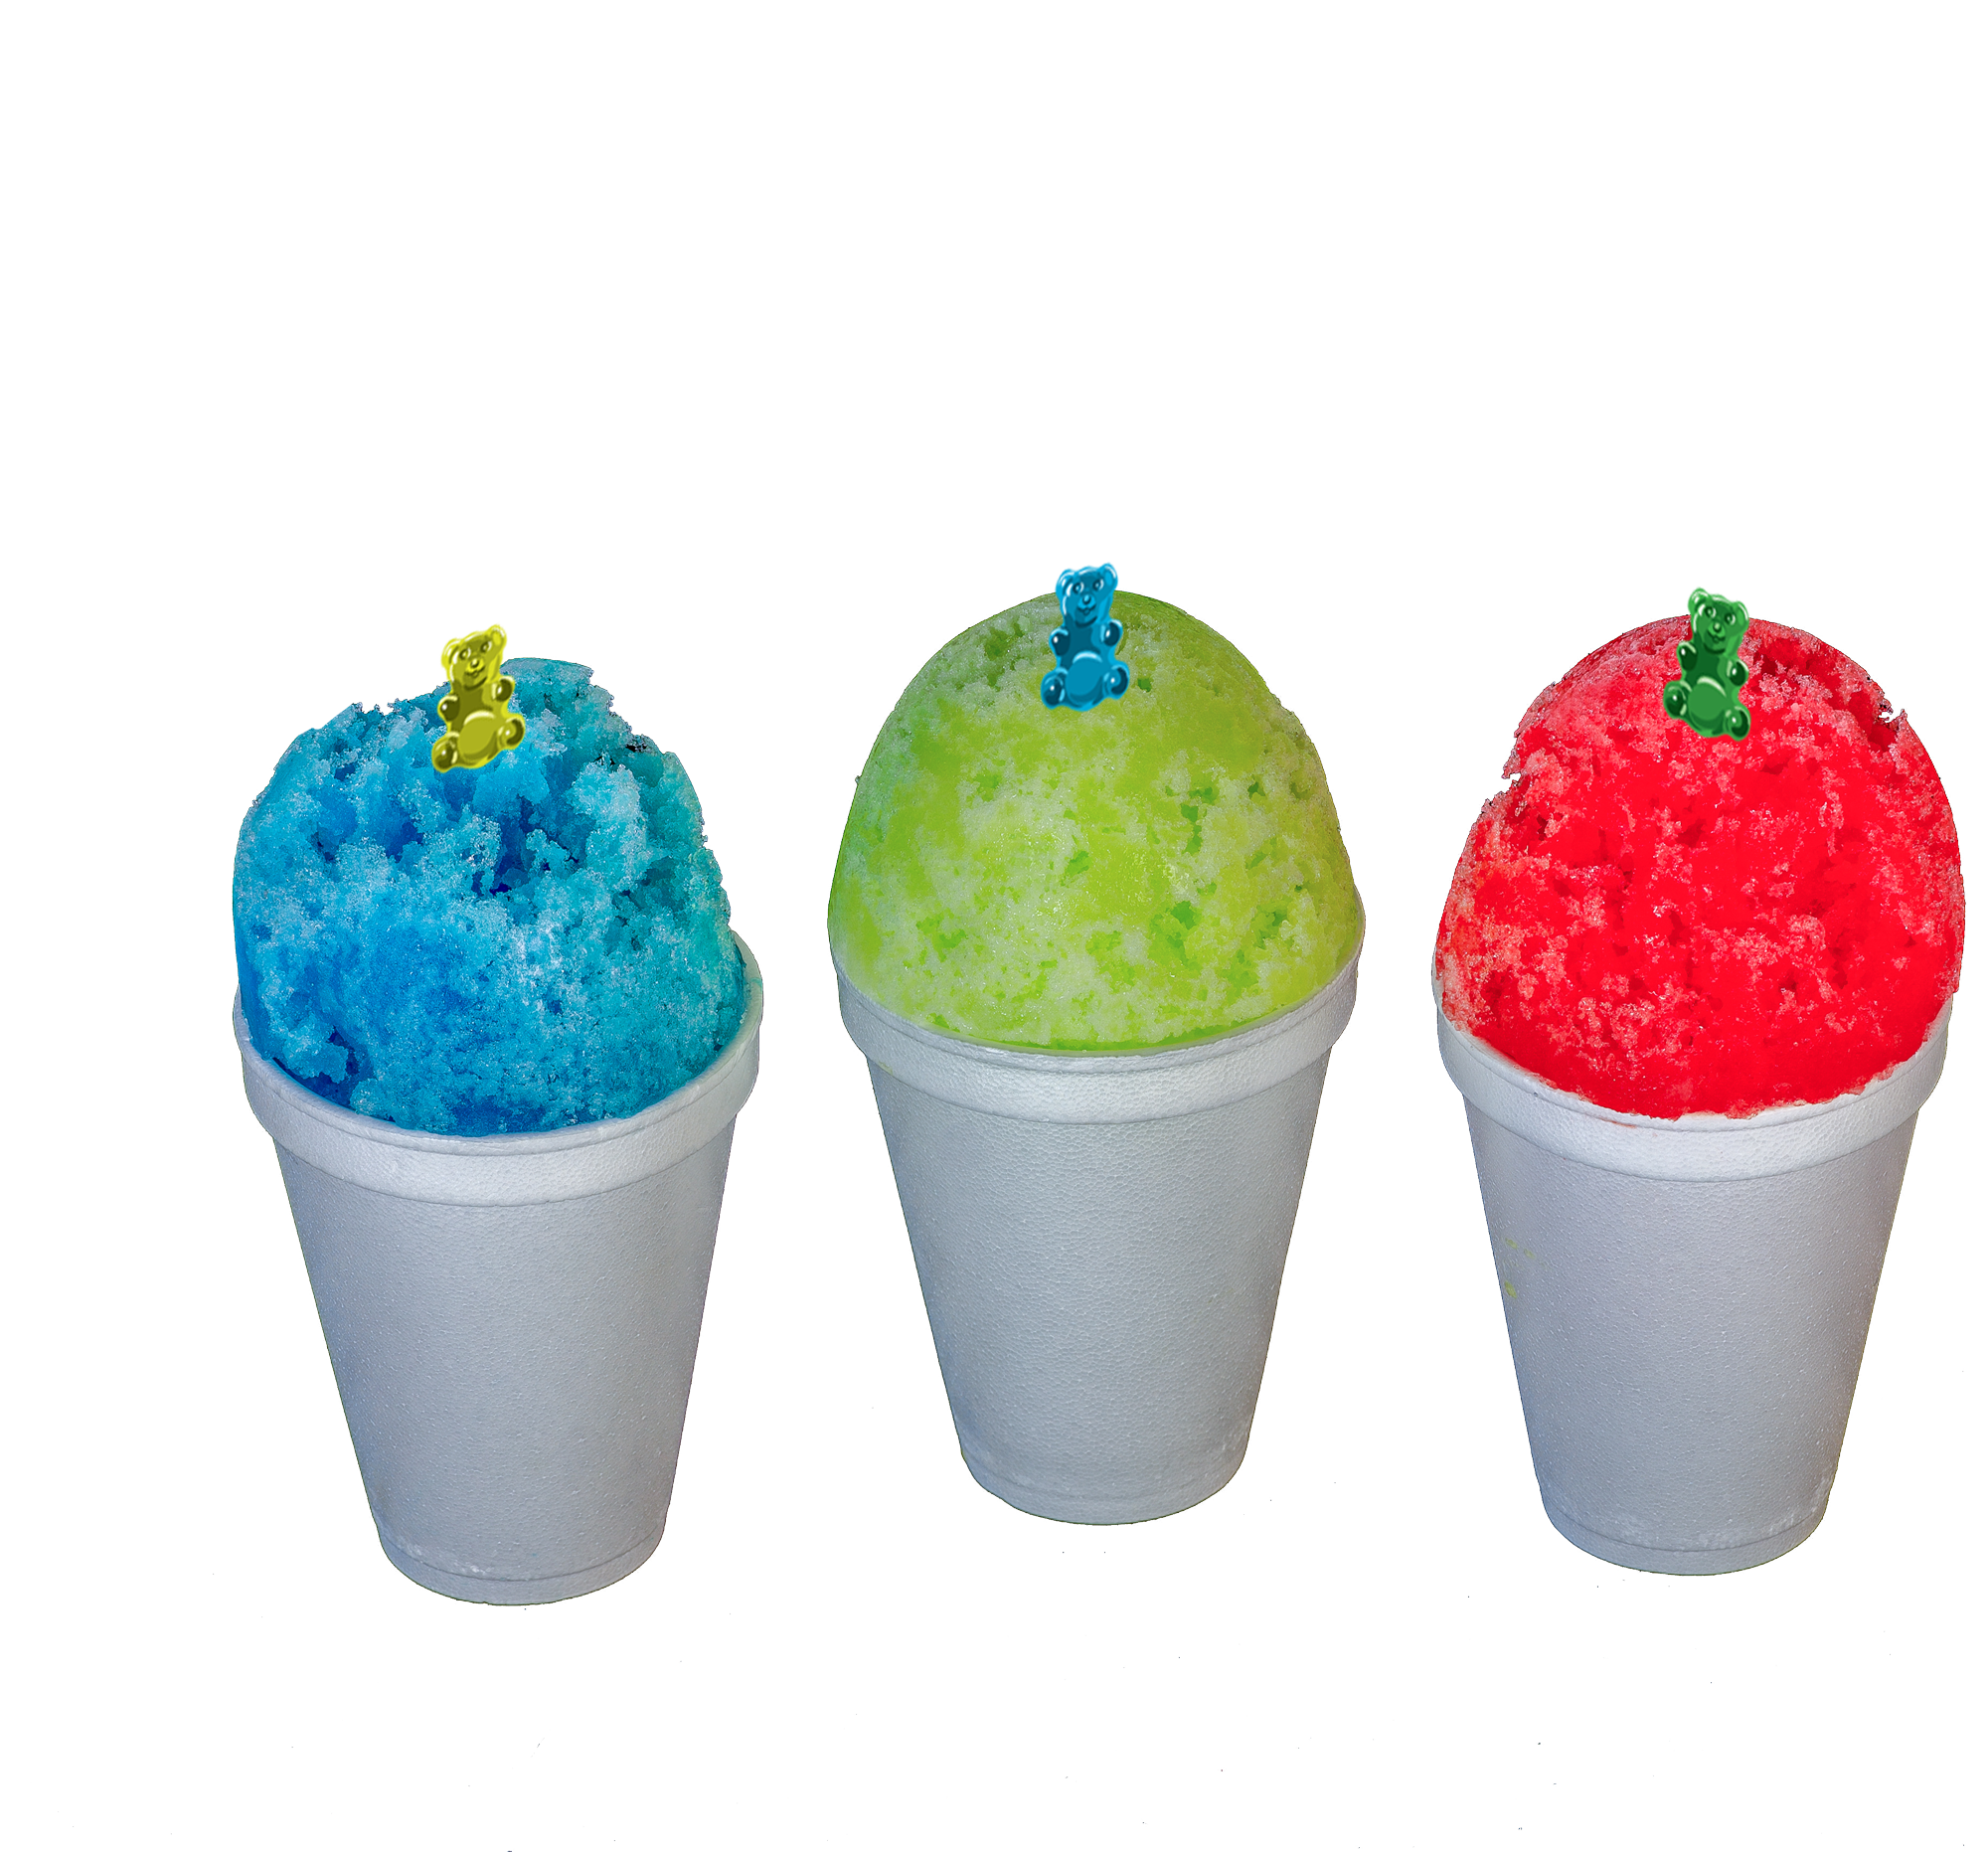 https://southernshavedice.com/wp-content/uploads/2022/04/3-now-cones-with-gummy-bears.png